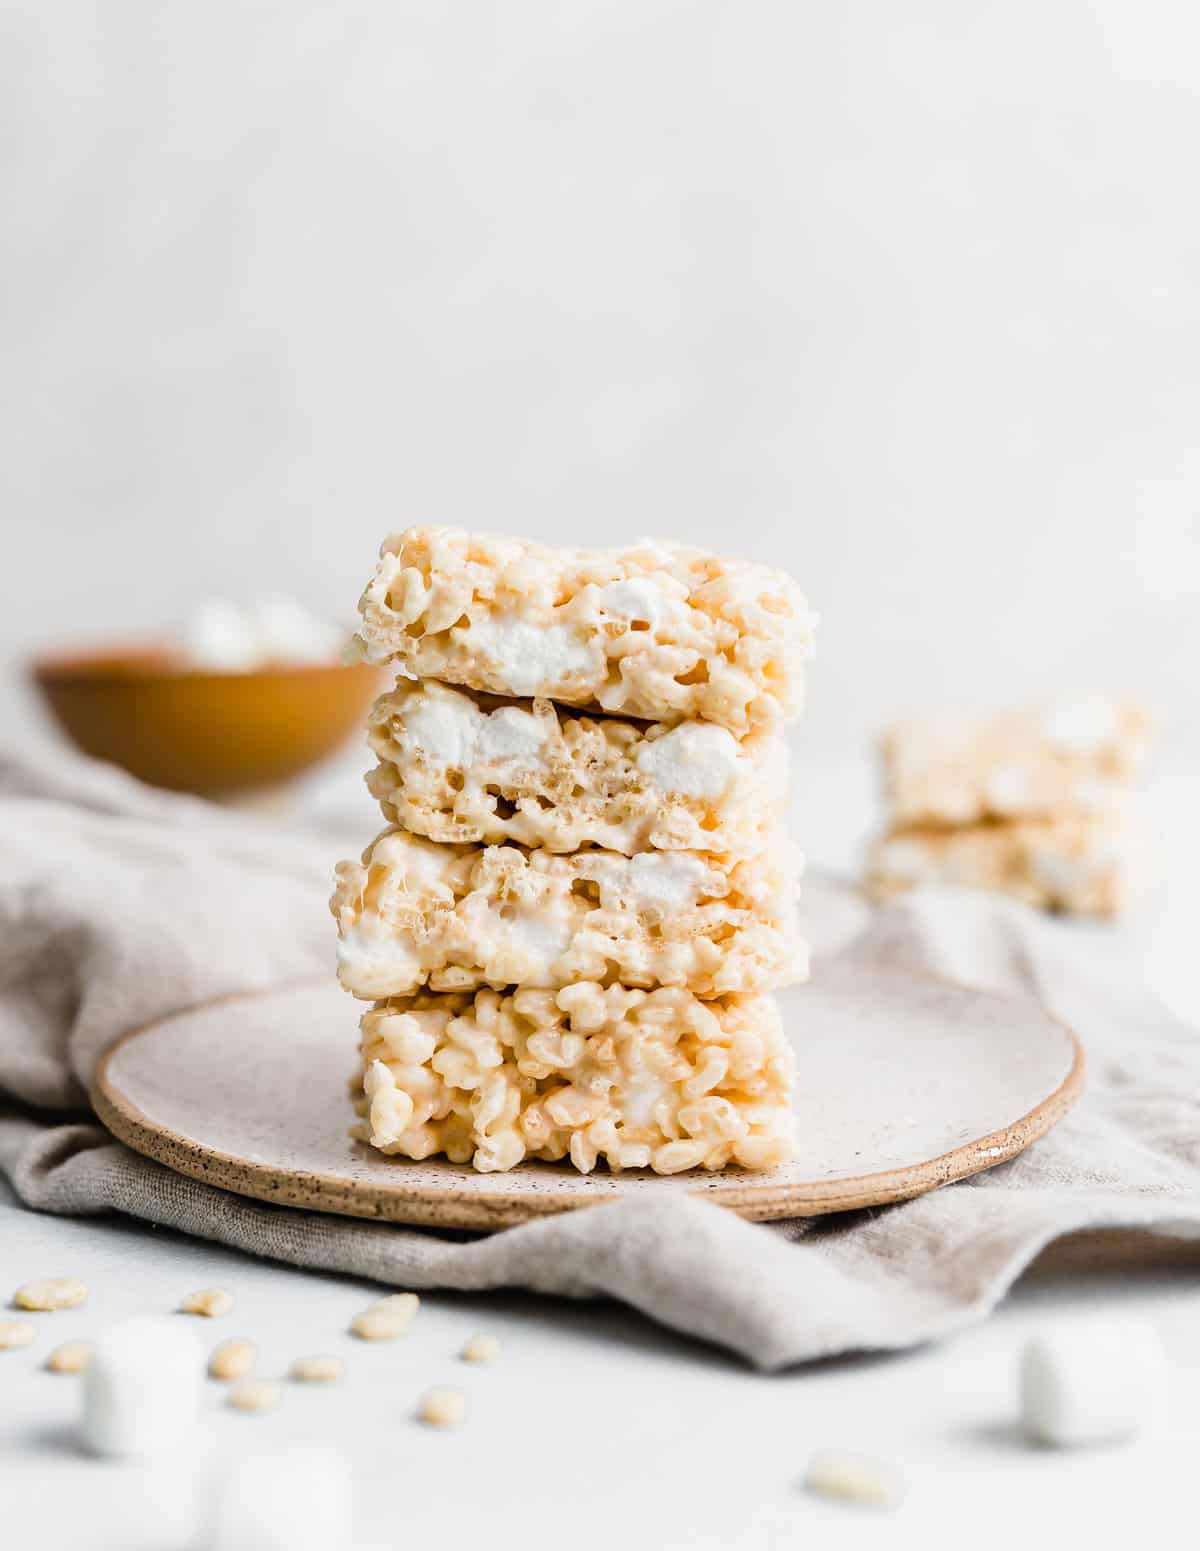 A stack of Rice Krispies Treats against a white background.